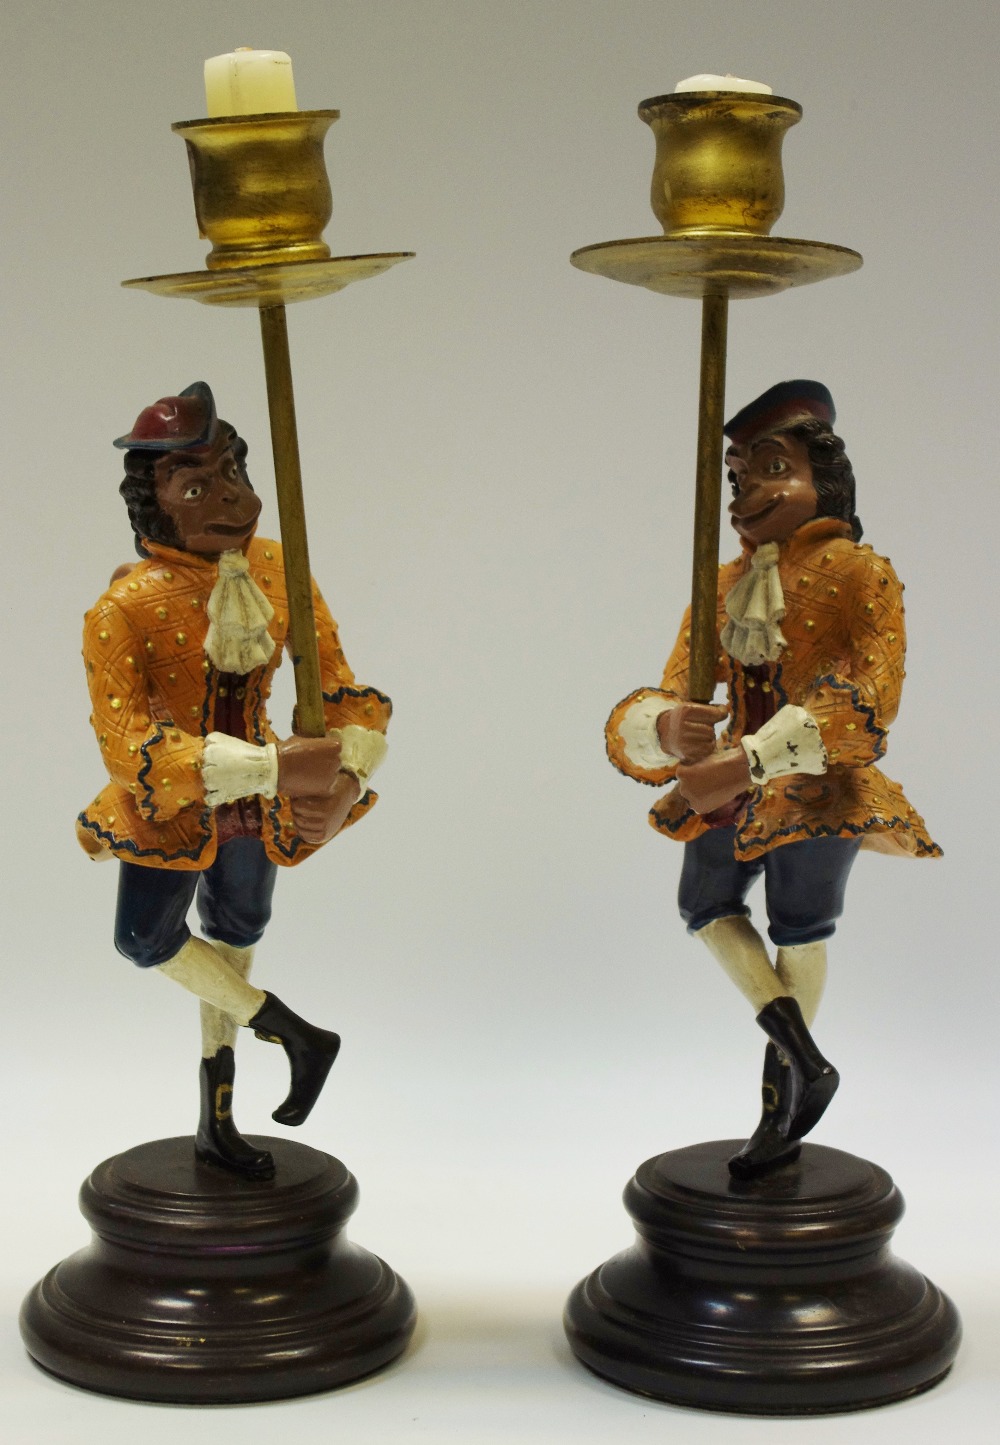 A pair of novelty cold painted metal candlesticks of a monkey in 18th century dress,